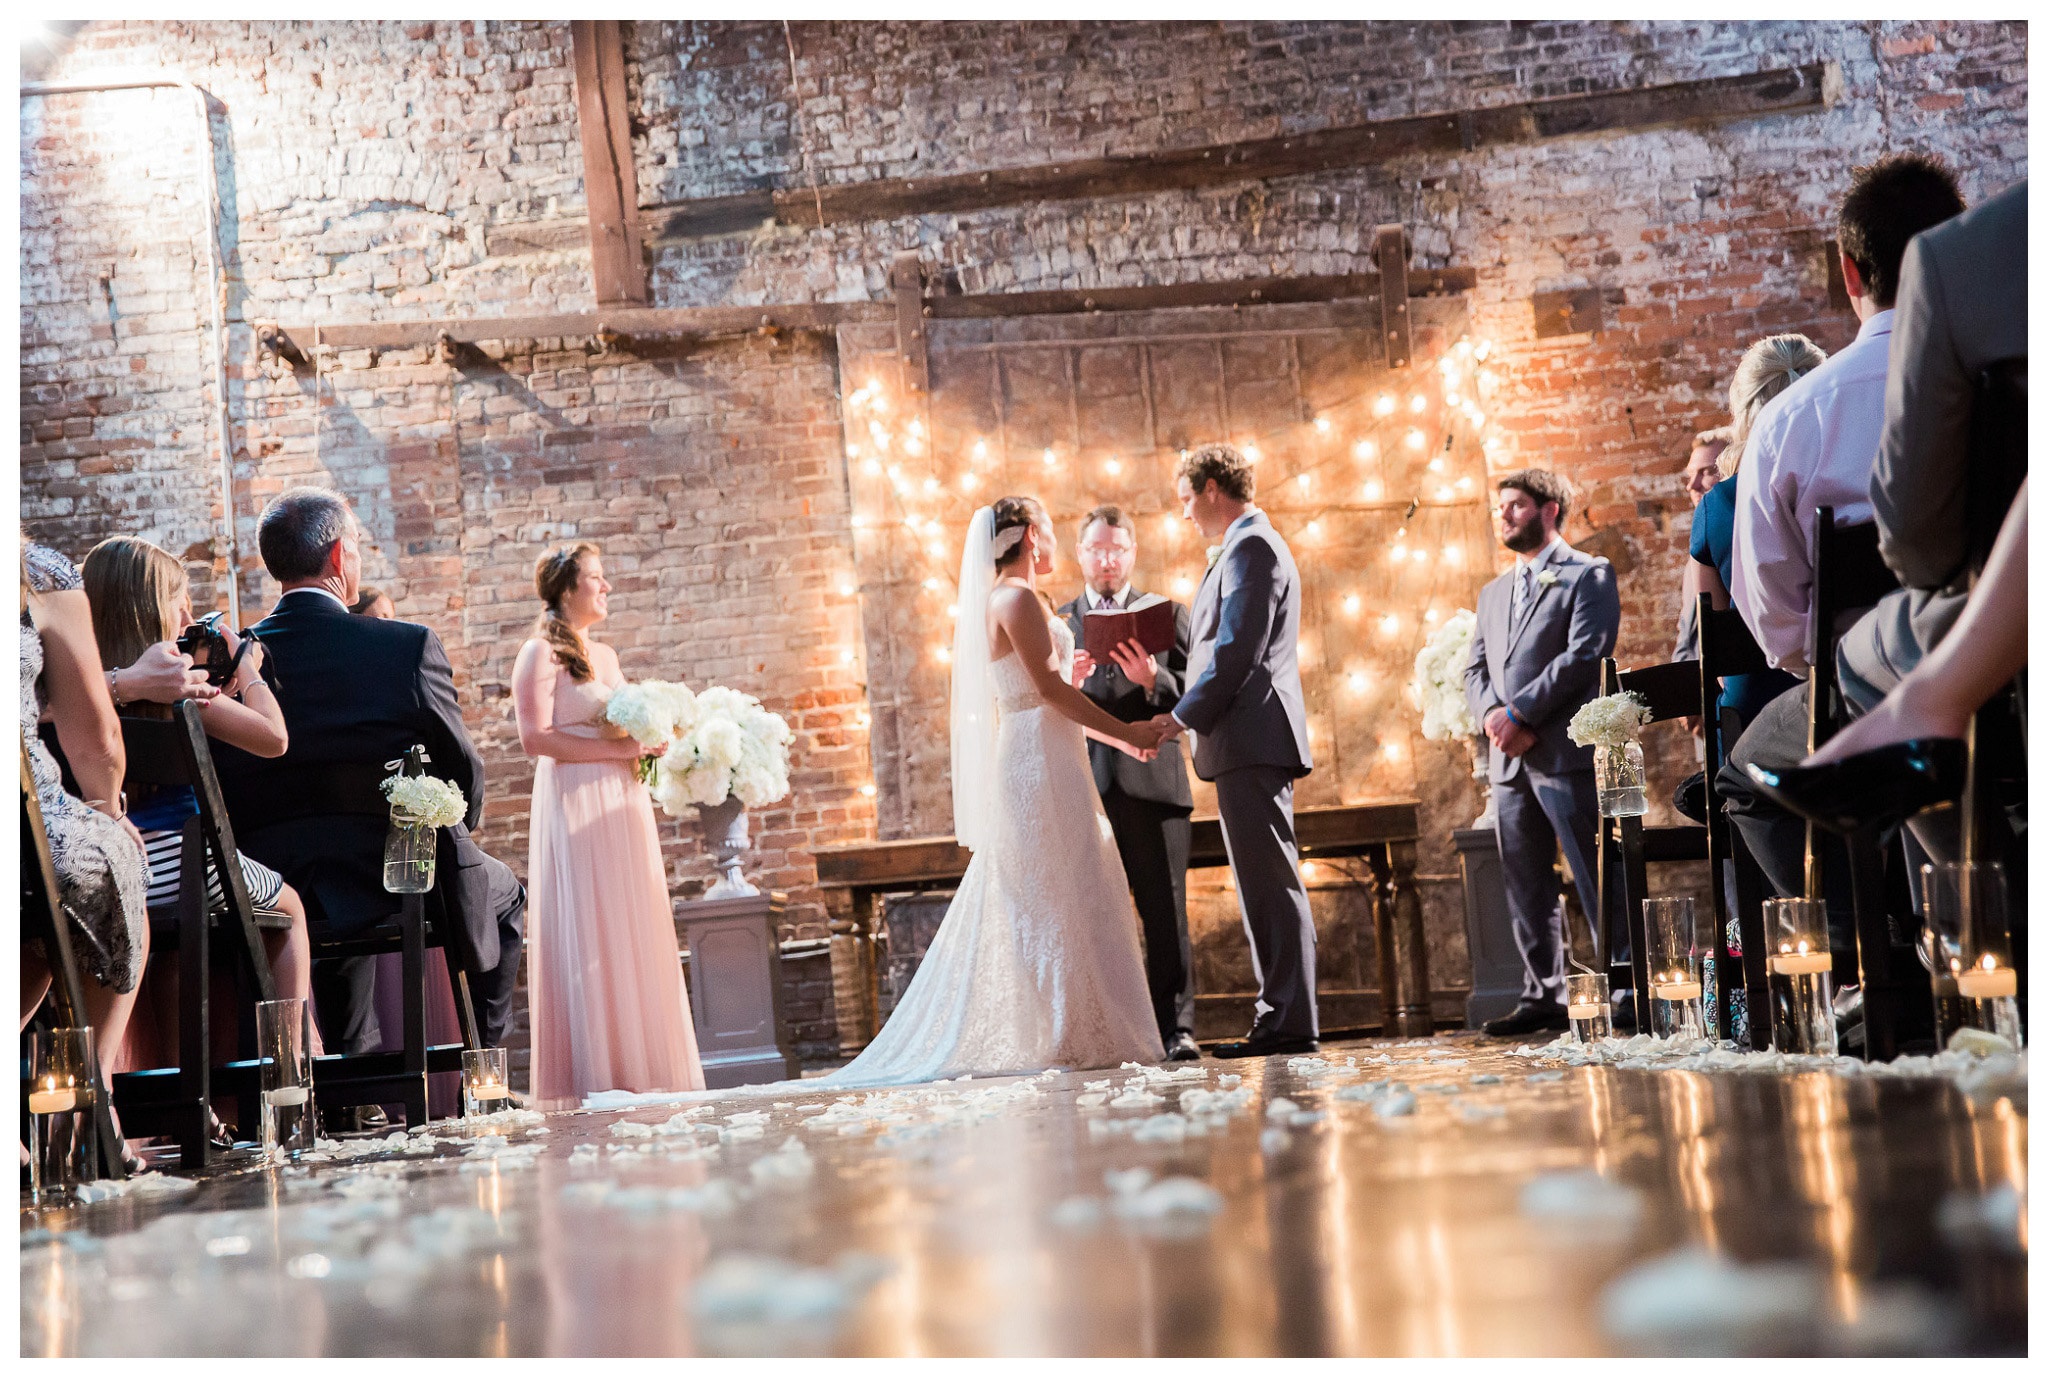 A perfect Scene - The Vows shot from the shimmering floor toward the industrial brick wall behind the couple and the pastor,  Venue and Catering – King plow Event Gallery and Bold American Events Decor and flowers – Stylish Stems Music and Band – Seven Sharp Nine Transportation – Georgia Trolley Photographer One Life Photography